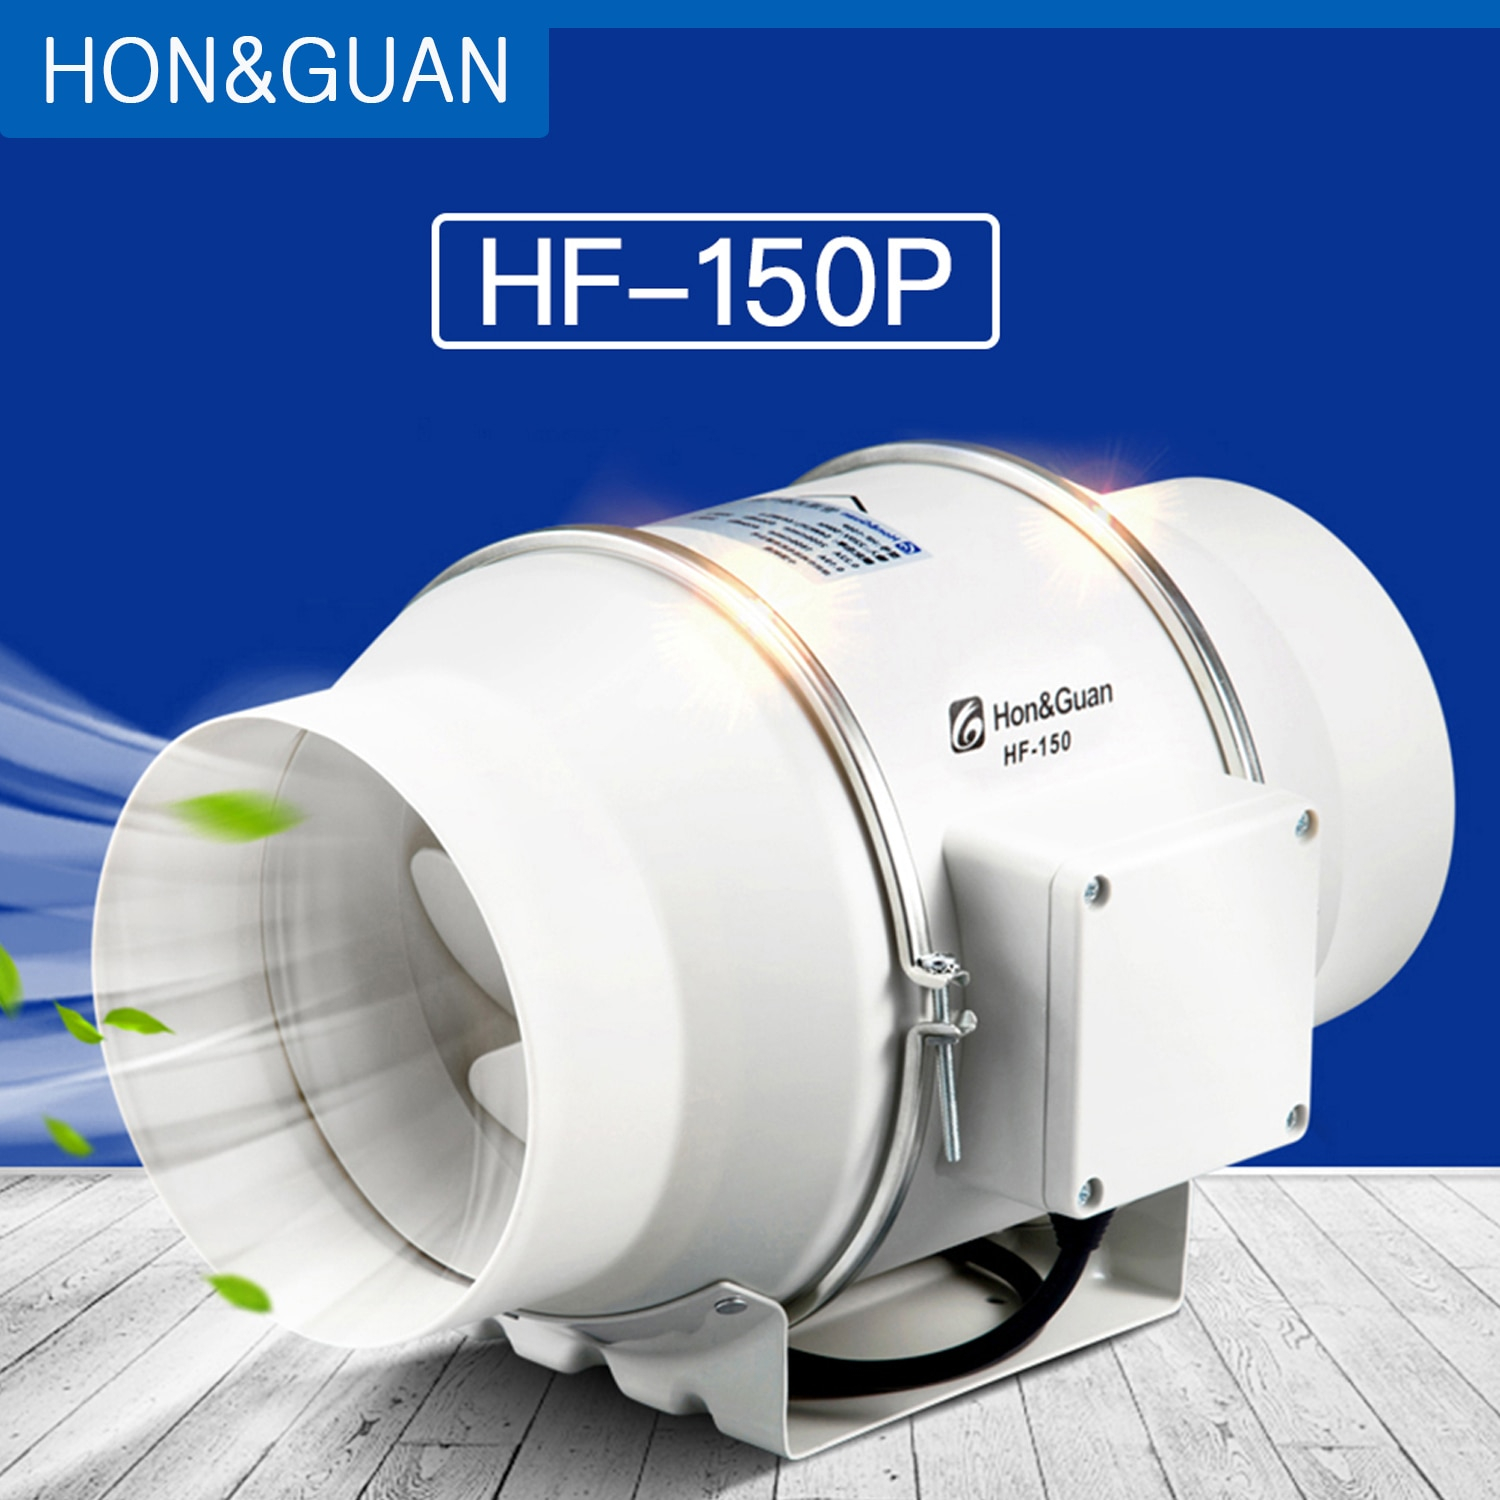 Us 10119 8 Offhonguan 6 Inline Duct Fan Exhaust Fan Mixed Flow Inline Fan Hydroponic Air Blower For Home Ventilation Bathroom Vent 312 intended for size 1500 X 1500